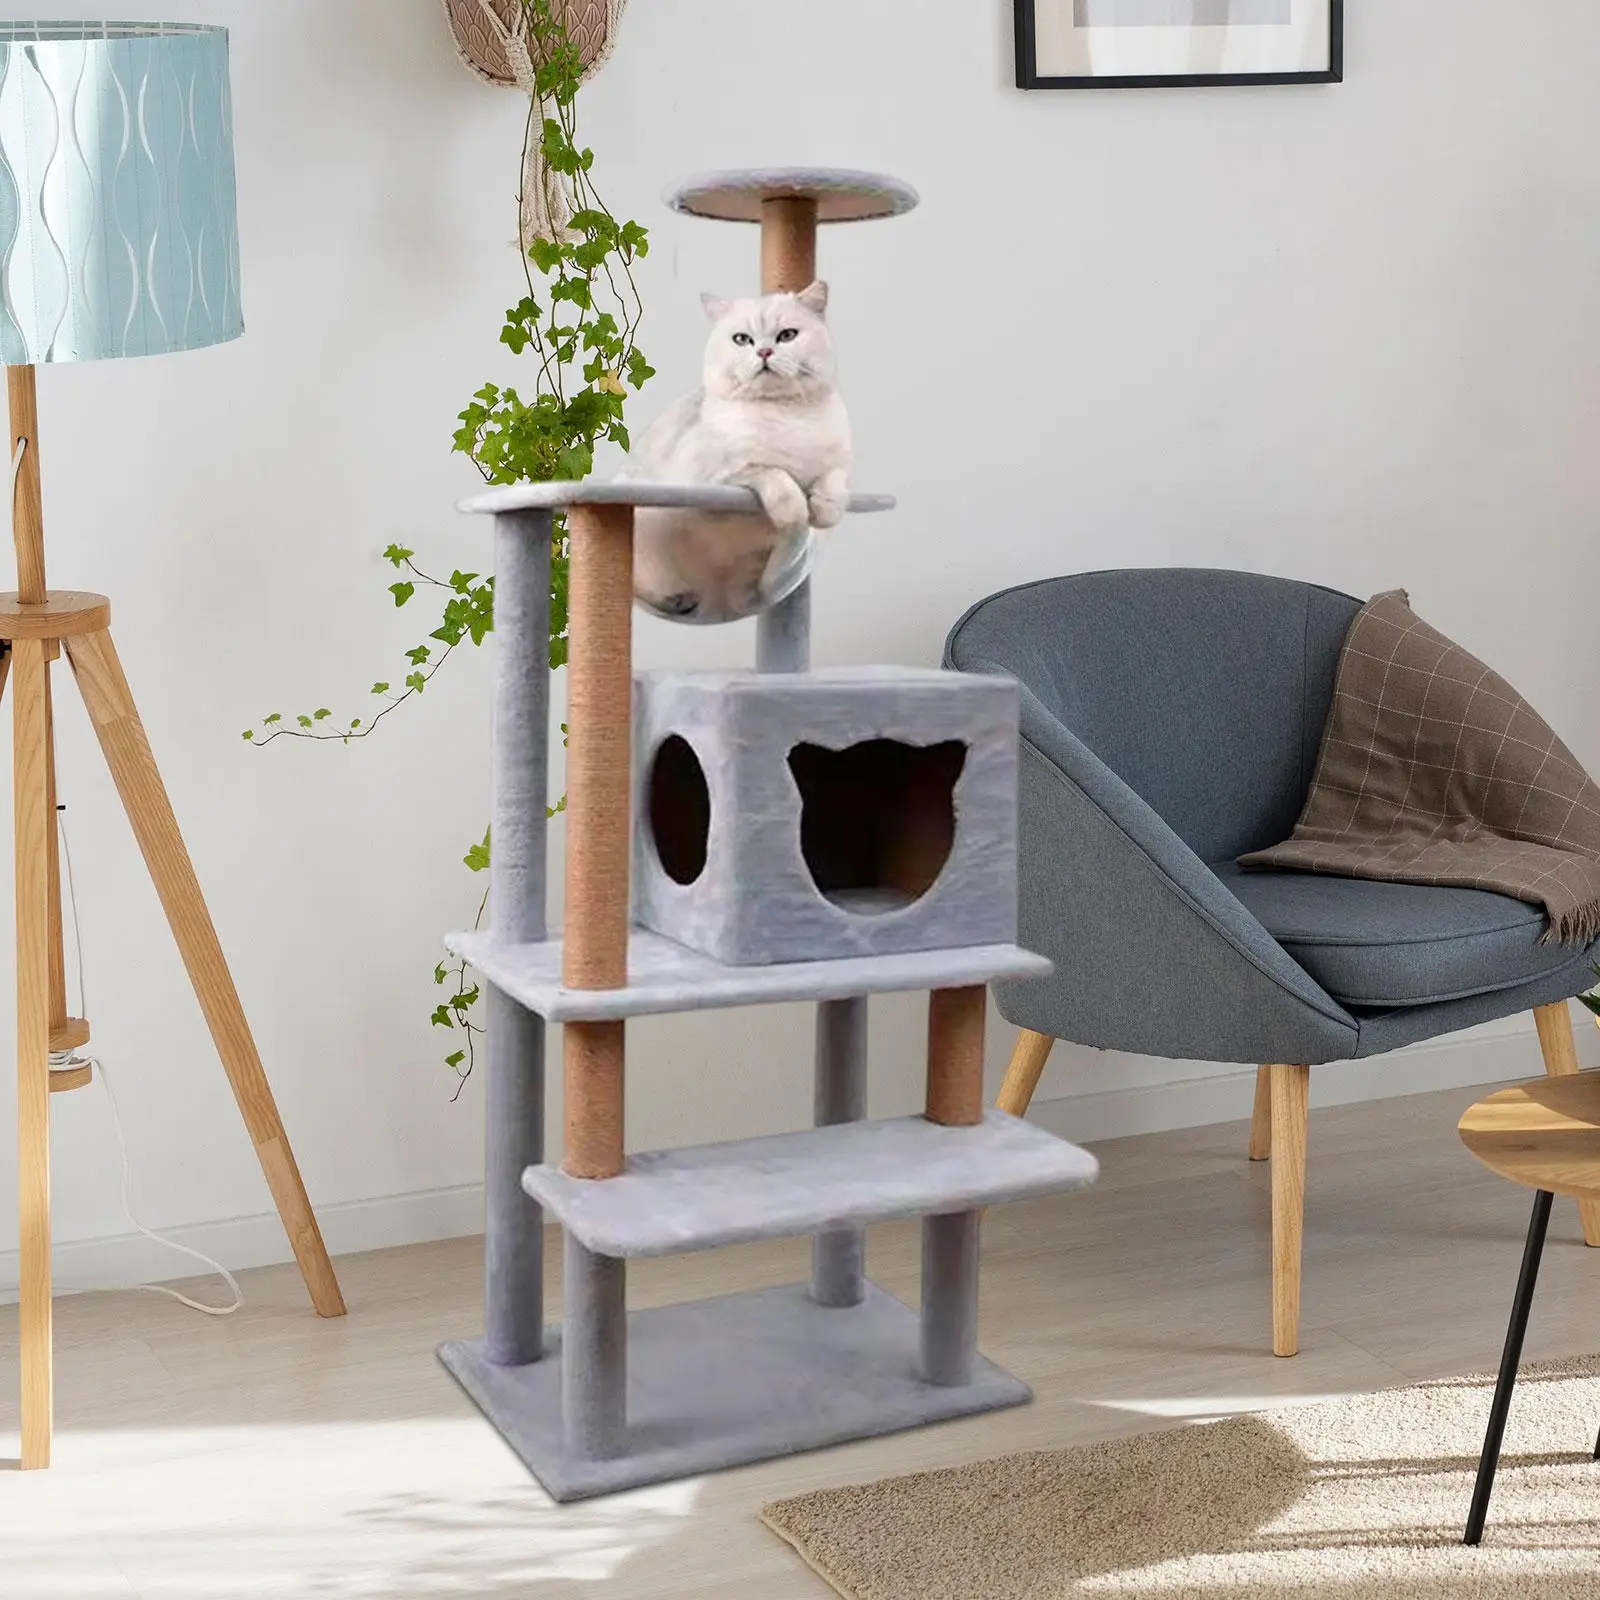 Multi Level Cat Tree Towers Cat Condo Hammock Basket Cat Scratching Post for Grinding Claw Playing Carpets Sofa Protector Kitty